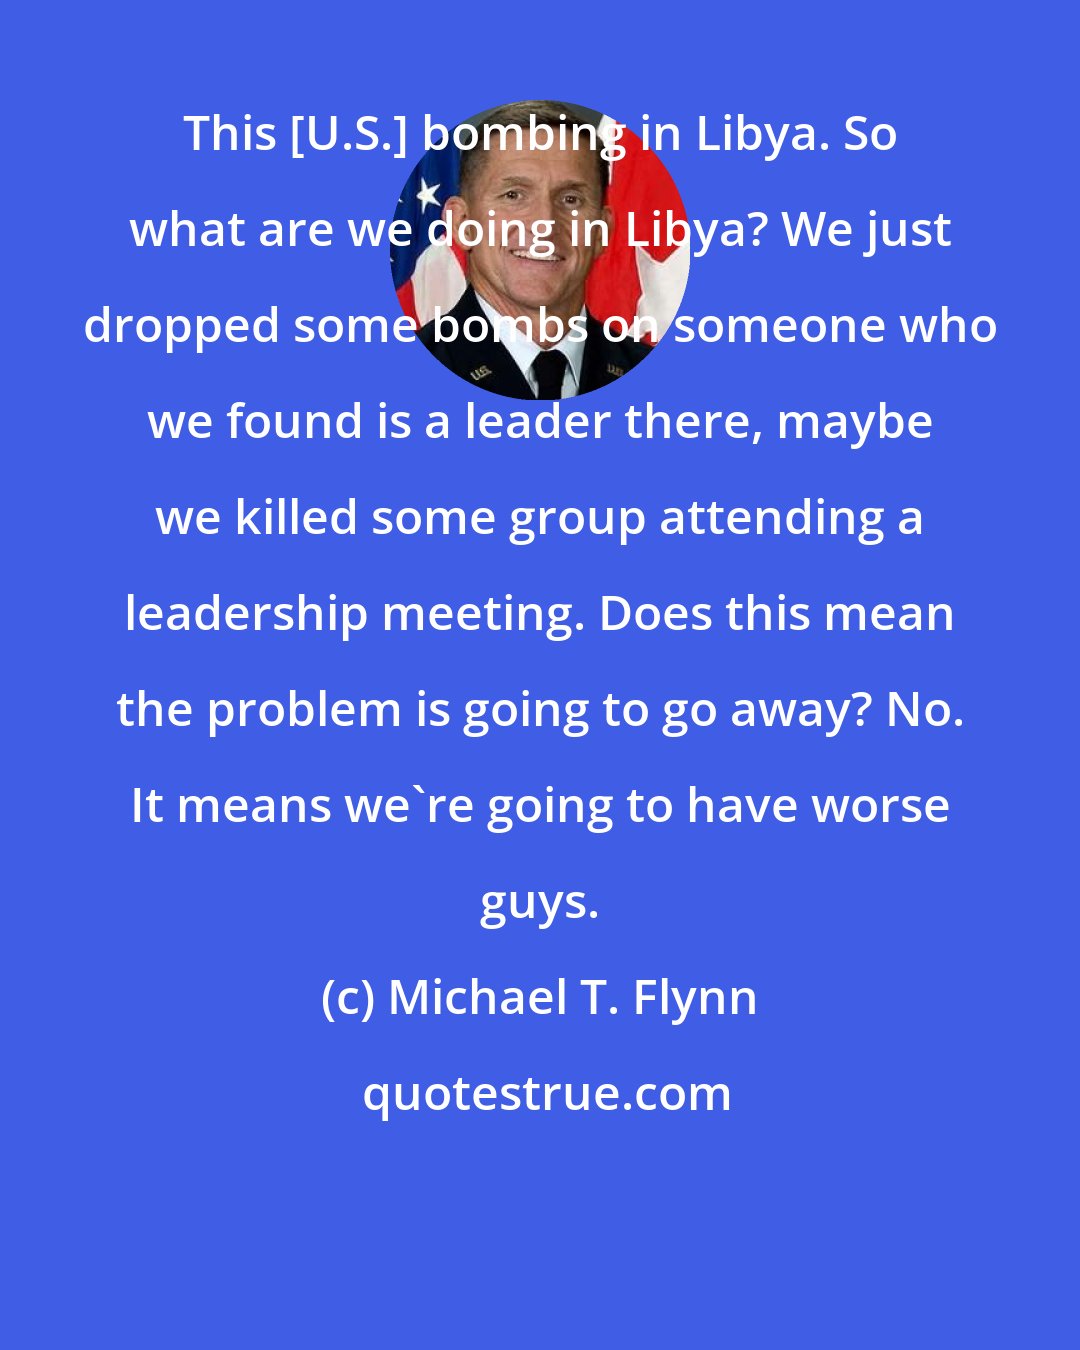 Michael T. Flynn: This [U.S.] bombing in Libya. So what are we doing in Libya? We just dropped some bombs on someone who we found is a leader there, maybe we killed some group attending a leadership meeting. Does this mean the problem is going to go away? No. It means we're going to have worse guys.